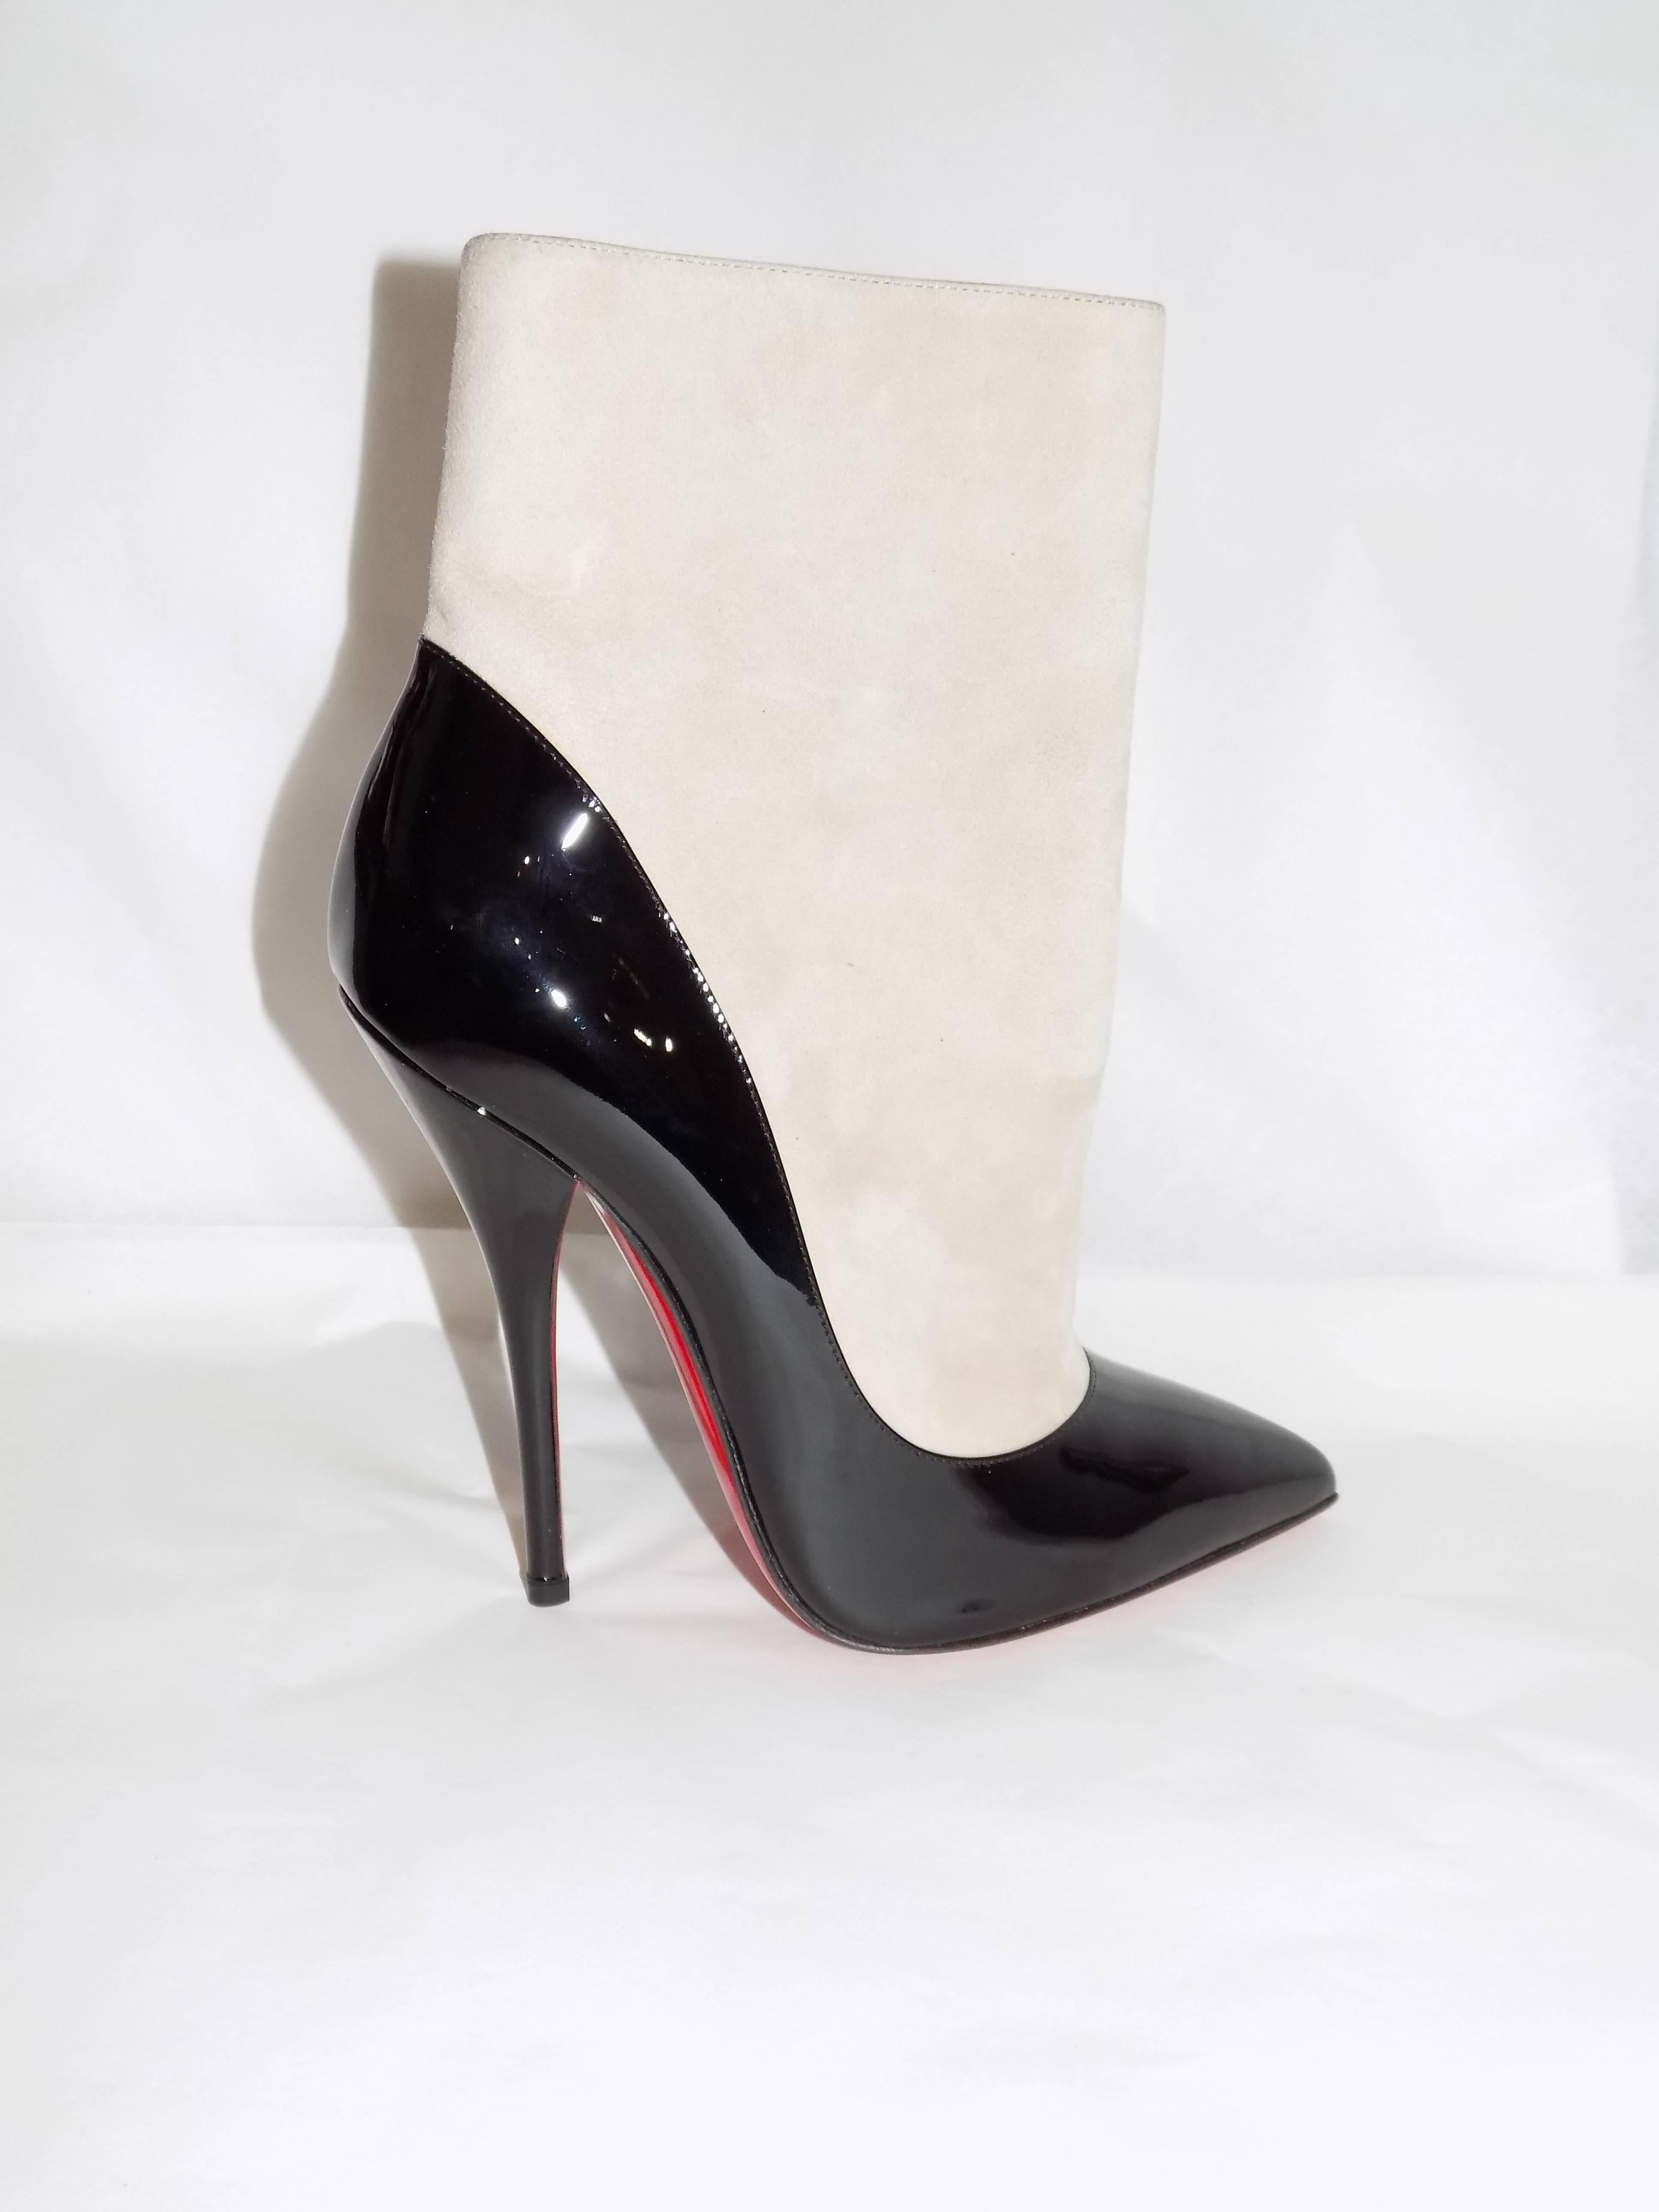 Christian Louboutin suede and patent leather ankle boots New sz 39 